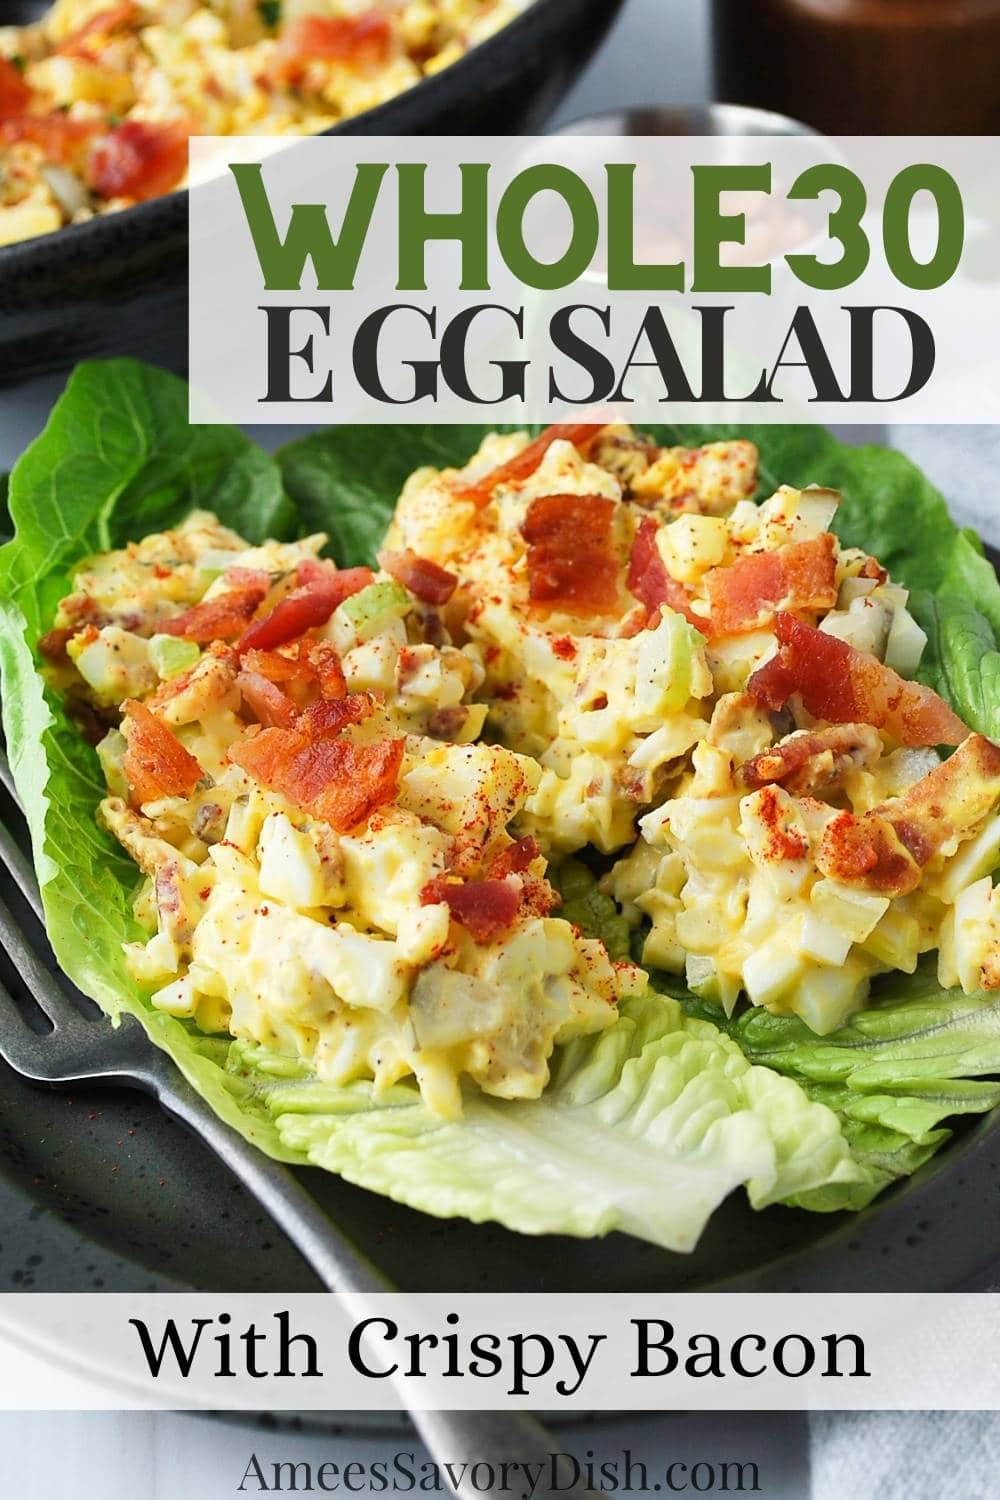 Make the best Whole30 Egg Salad in 5 minutes or less! Served in lettuce cups, this rich, creamy, and flavorful egg salad is the perfect protein-packed Whole30 lunch. via @Ameessavorydish